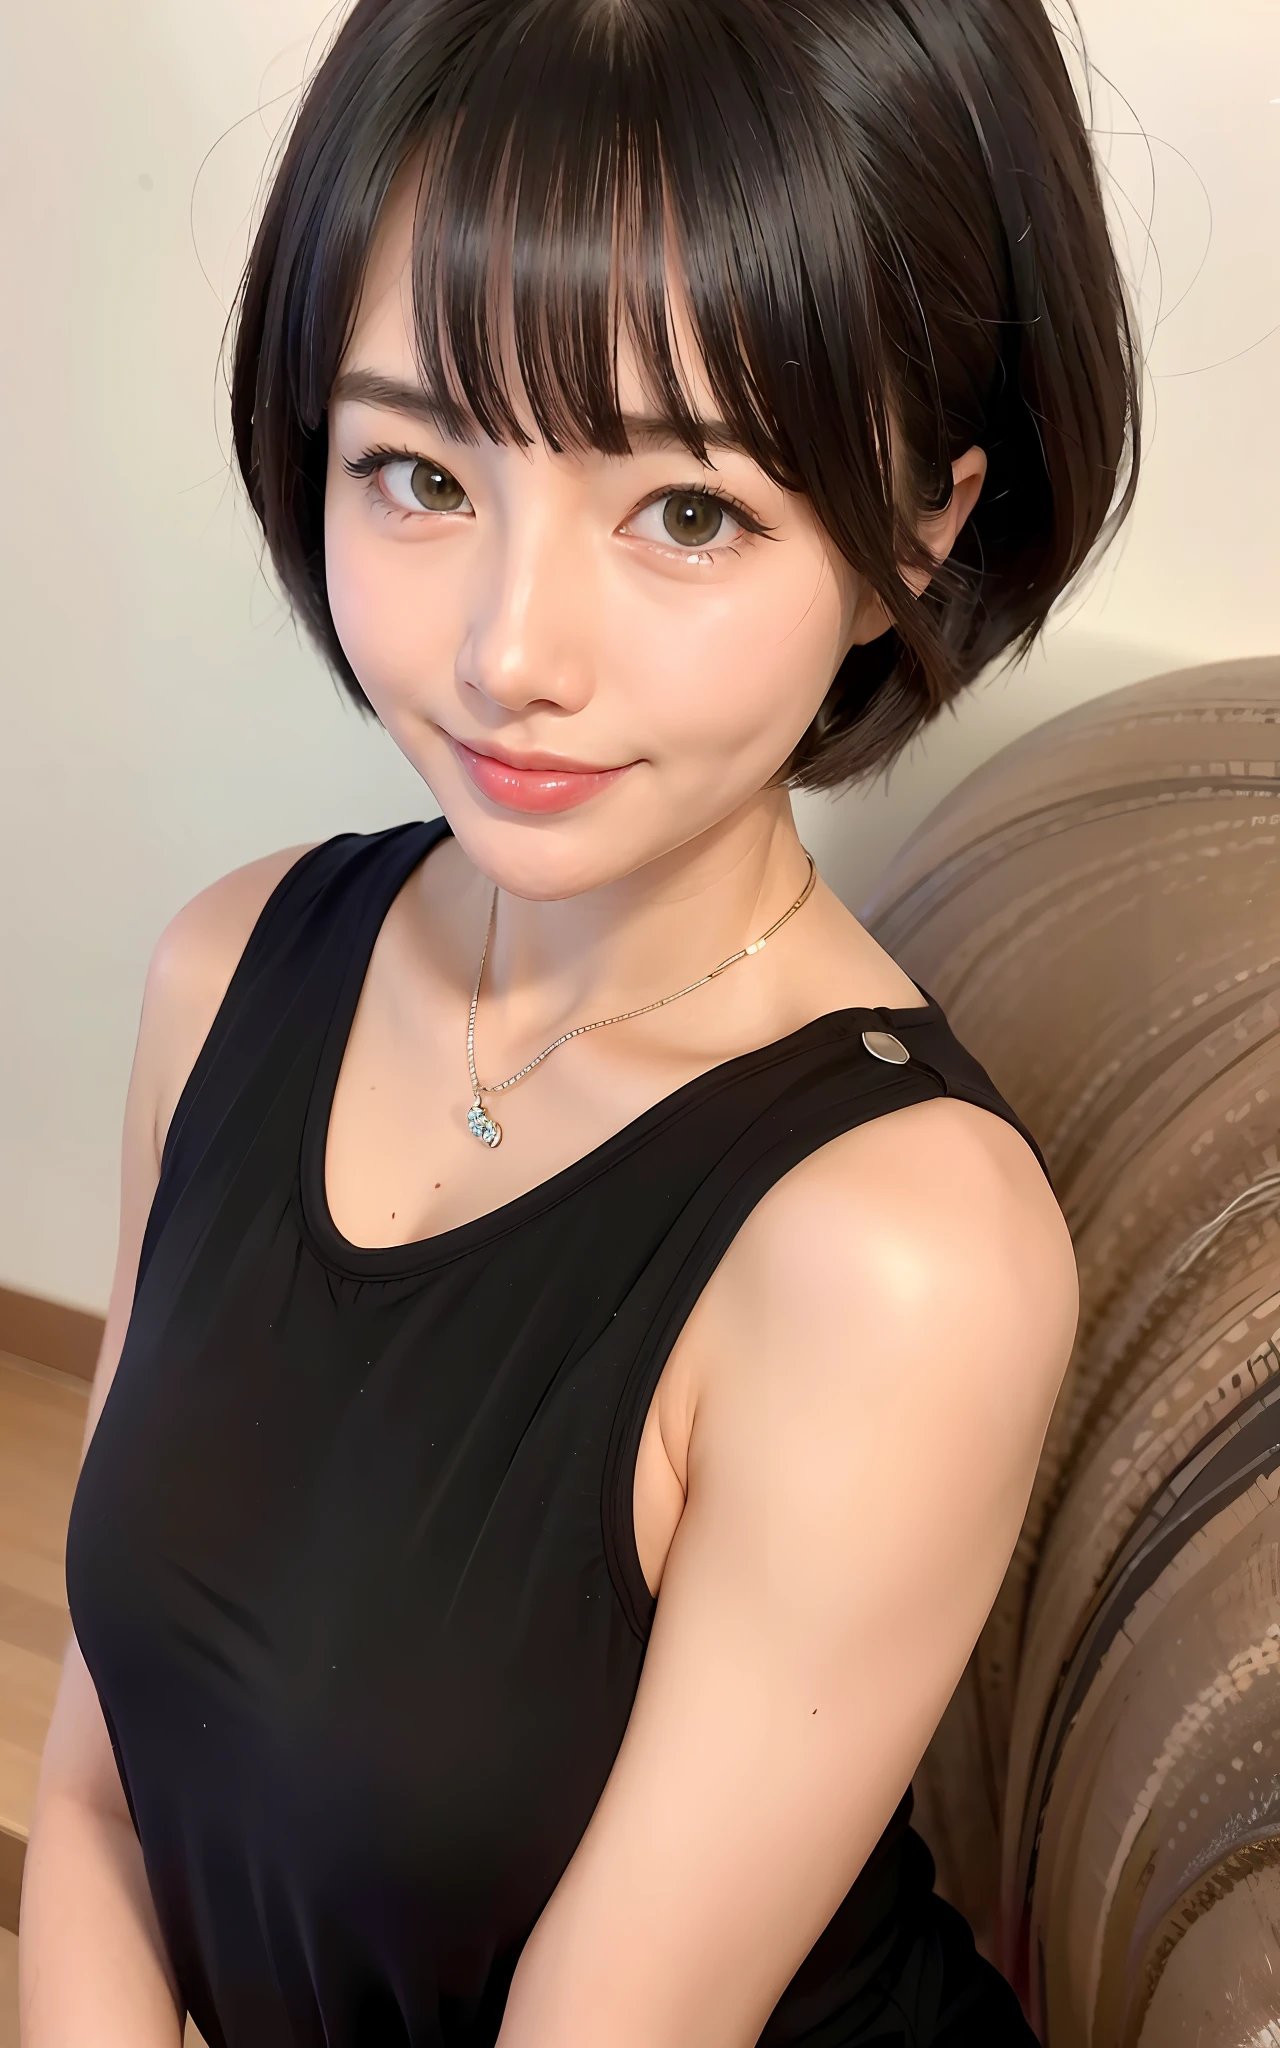 (Photorealistic: 1.4), masterpiece, ultra high resolution, RAW photos, highest quality, (open smile: 4.0), (big smile: 2.5), (white teeth: 2.0), (sexy: 1.4), raw photo, Japan beautiful wife 1, 25 years old, pure white skin, (cute: 3.0), (eyes with the corners of the eyes down: 2.0), (large and round eyes: 3.0), (moisturized eyes: 3.0), ( Upper eye looking at the camera: 3.0), (figure eight eyebrows: 2.0), blush, slender, (brown short hair: 1.2), bangs, revealing chest, lace bra,